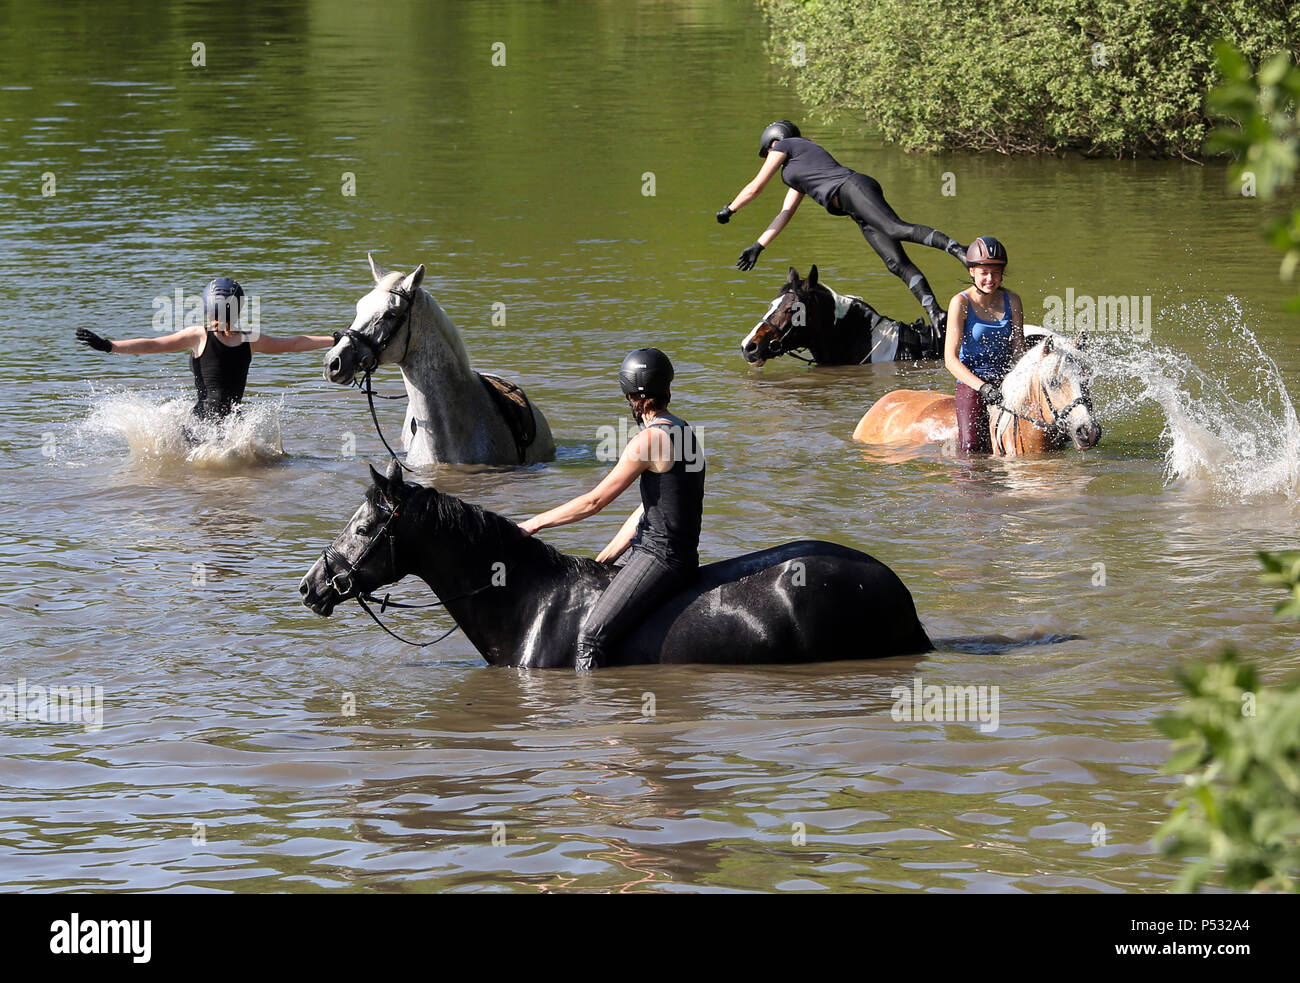 Oberoderwitz, Saxony, Germany - Girls jump from their horses into a lake Stock Photo